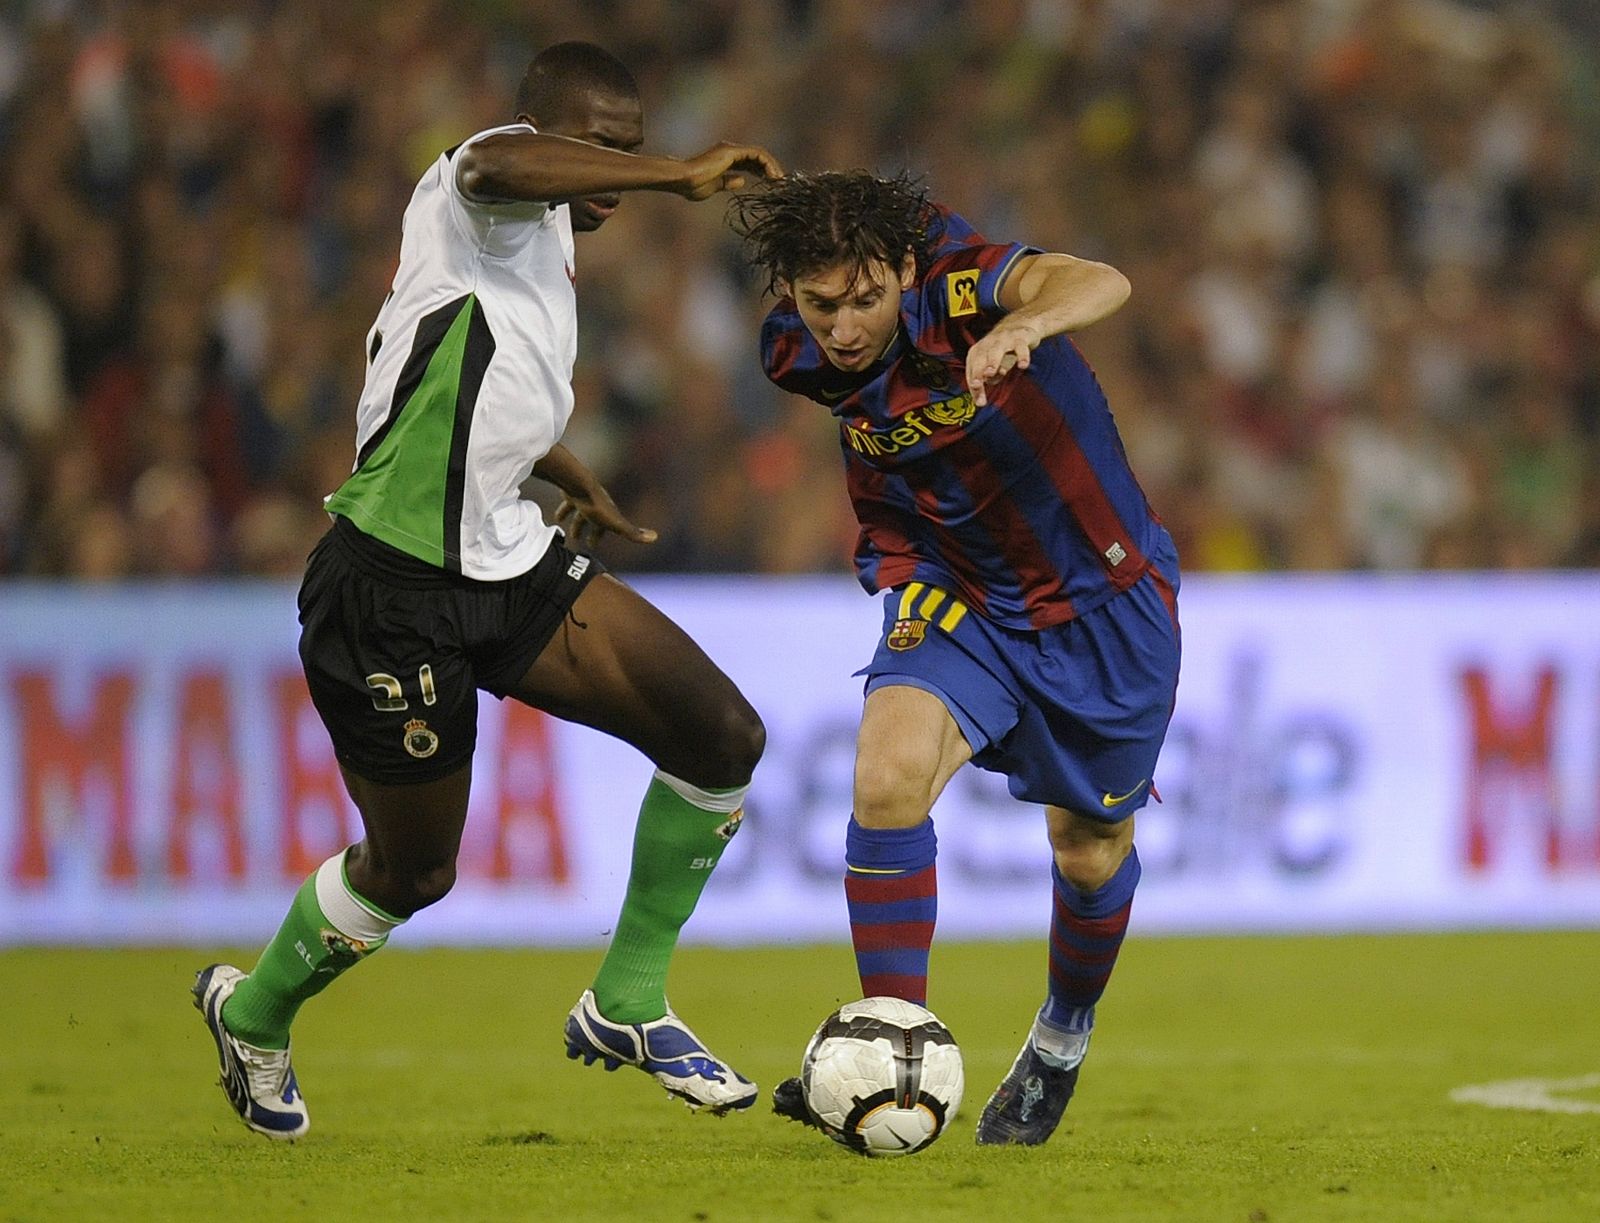 Barcelona's Messi battles for ball with Racing Santander's  Diop during their Spanish First Division soccer match in Santander